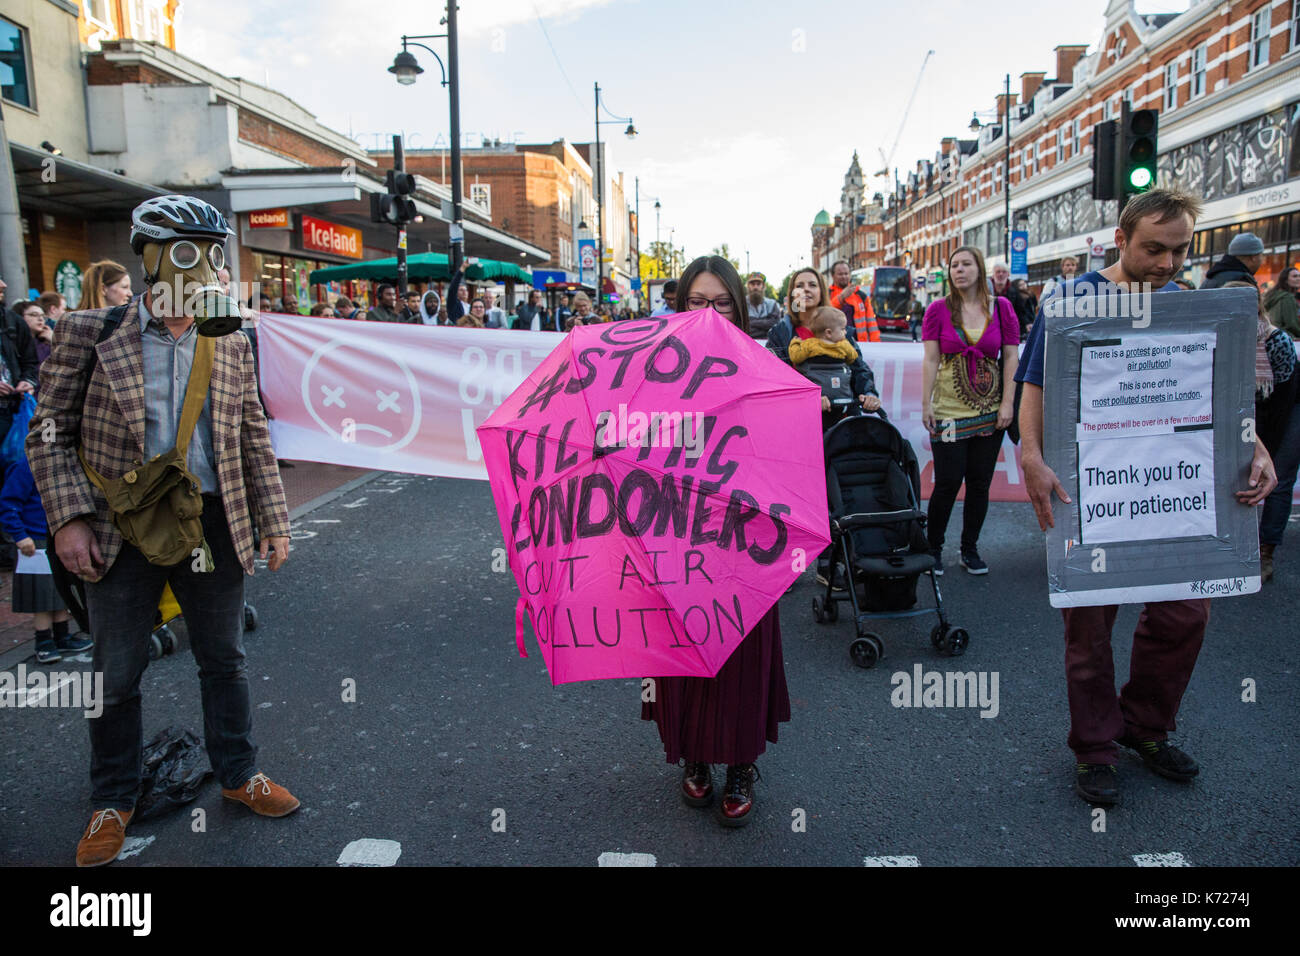 London, UK. 14th Sep, 2017. Environmental activists from Stop Killing Londoners and Mums for Lungs campaign block Brixton Road in front of Brixton station at rush hour as part of a protest demanding urgent attention to prevent premature deaths from air pollution. Levels of nitrogen dioxide, linked to 9,500 early deaths a year in London, recorded in Brixton Road have repeatedly breached the EU limit. Credit: Mark Kerrison/Alamy Live News Stock Photo